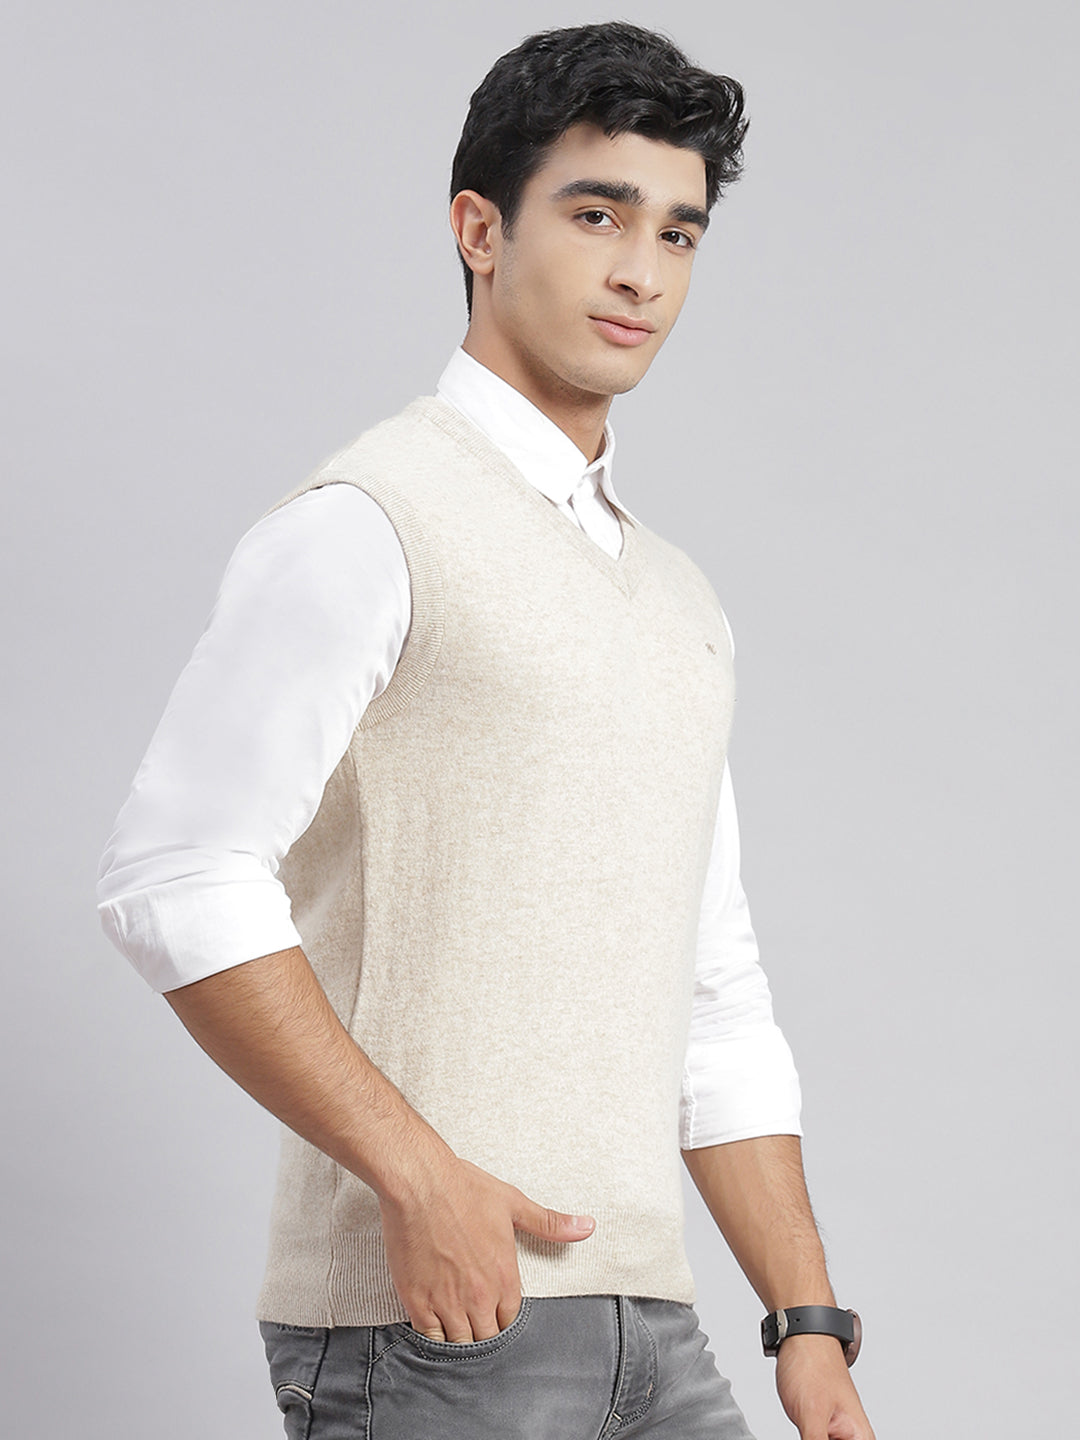 Men Cream Solid V Neck Sleeveless Sweaters/Pullovers